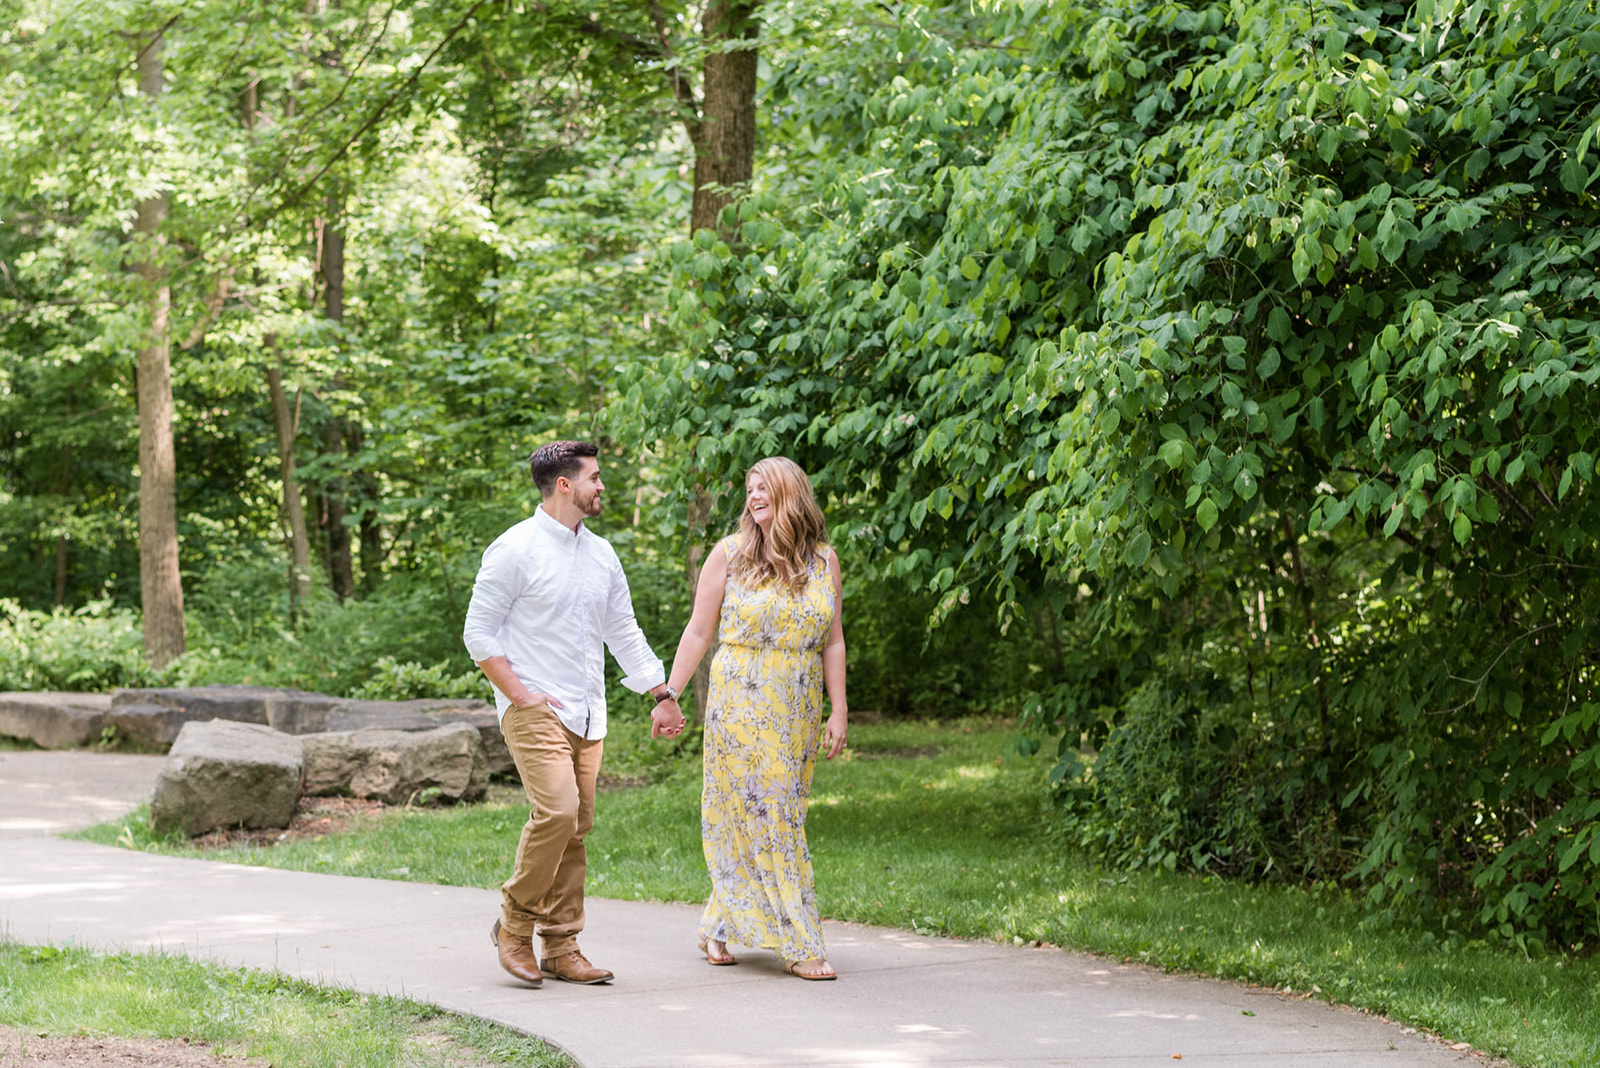 Dee & Gabe Engagement at Creekside Park in Gahanna, Ohio Sweet Williams Photography